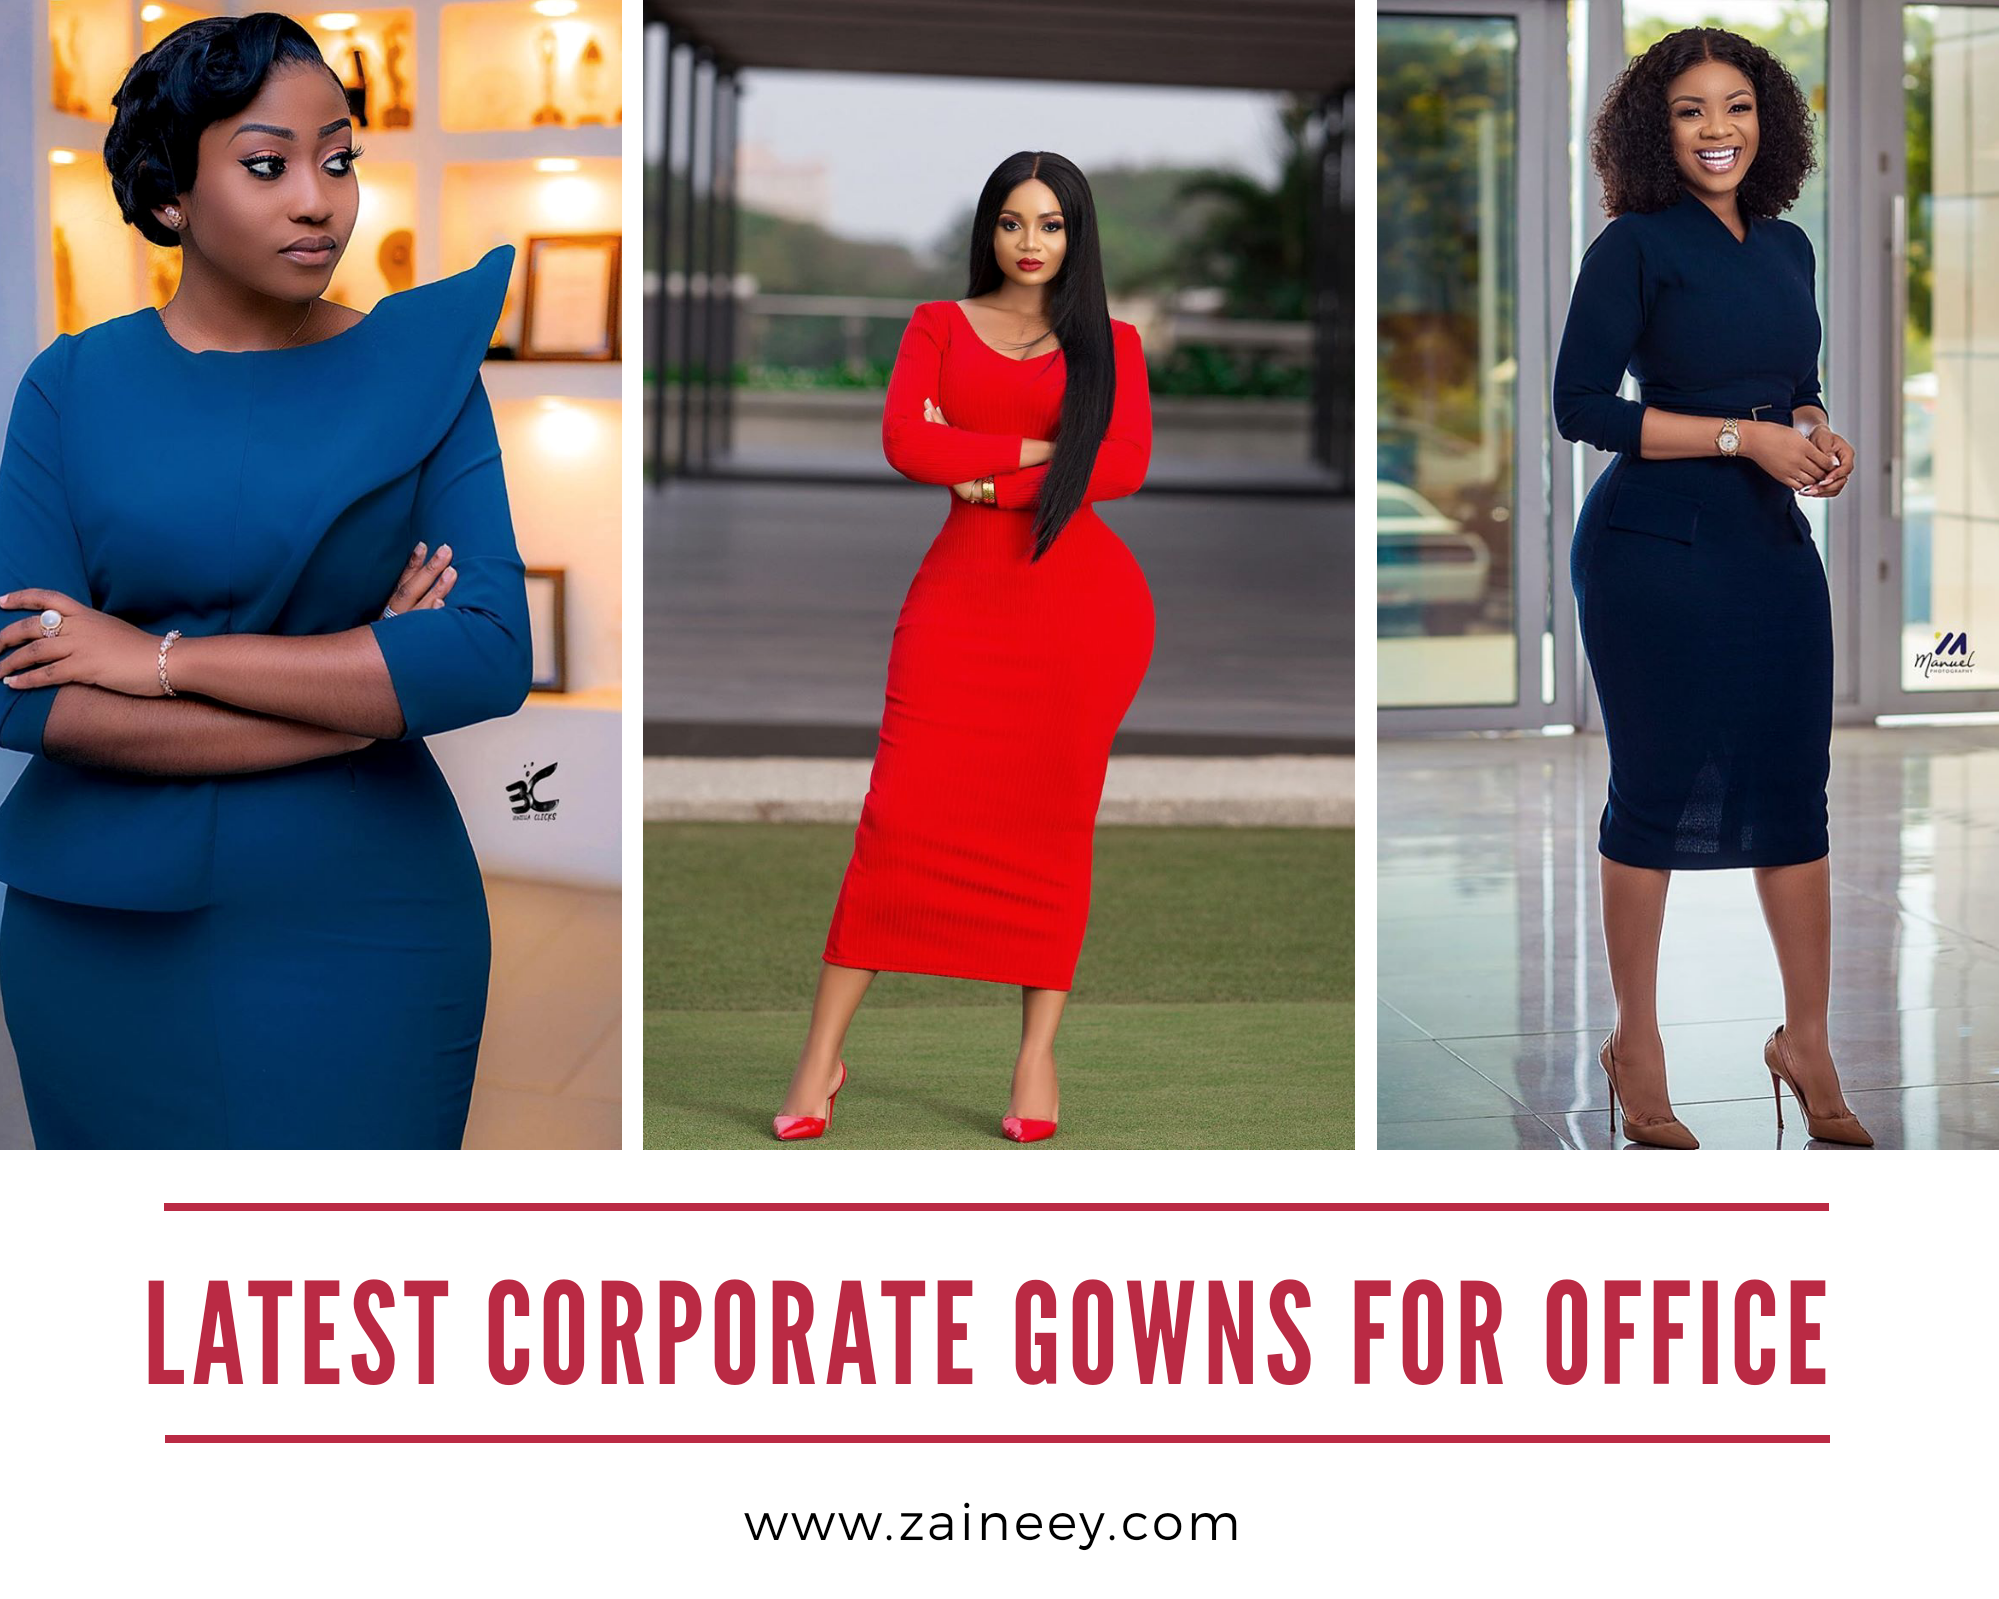 Latest corporate gowns for office - office friendly looks you'll love 